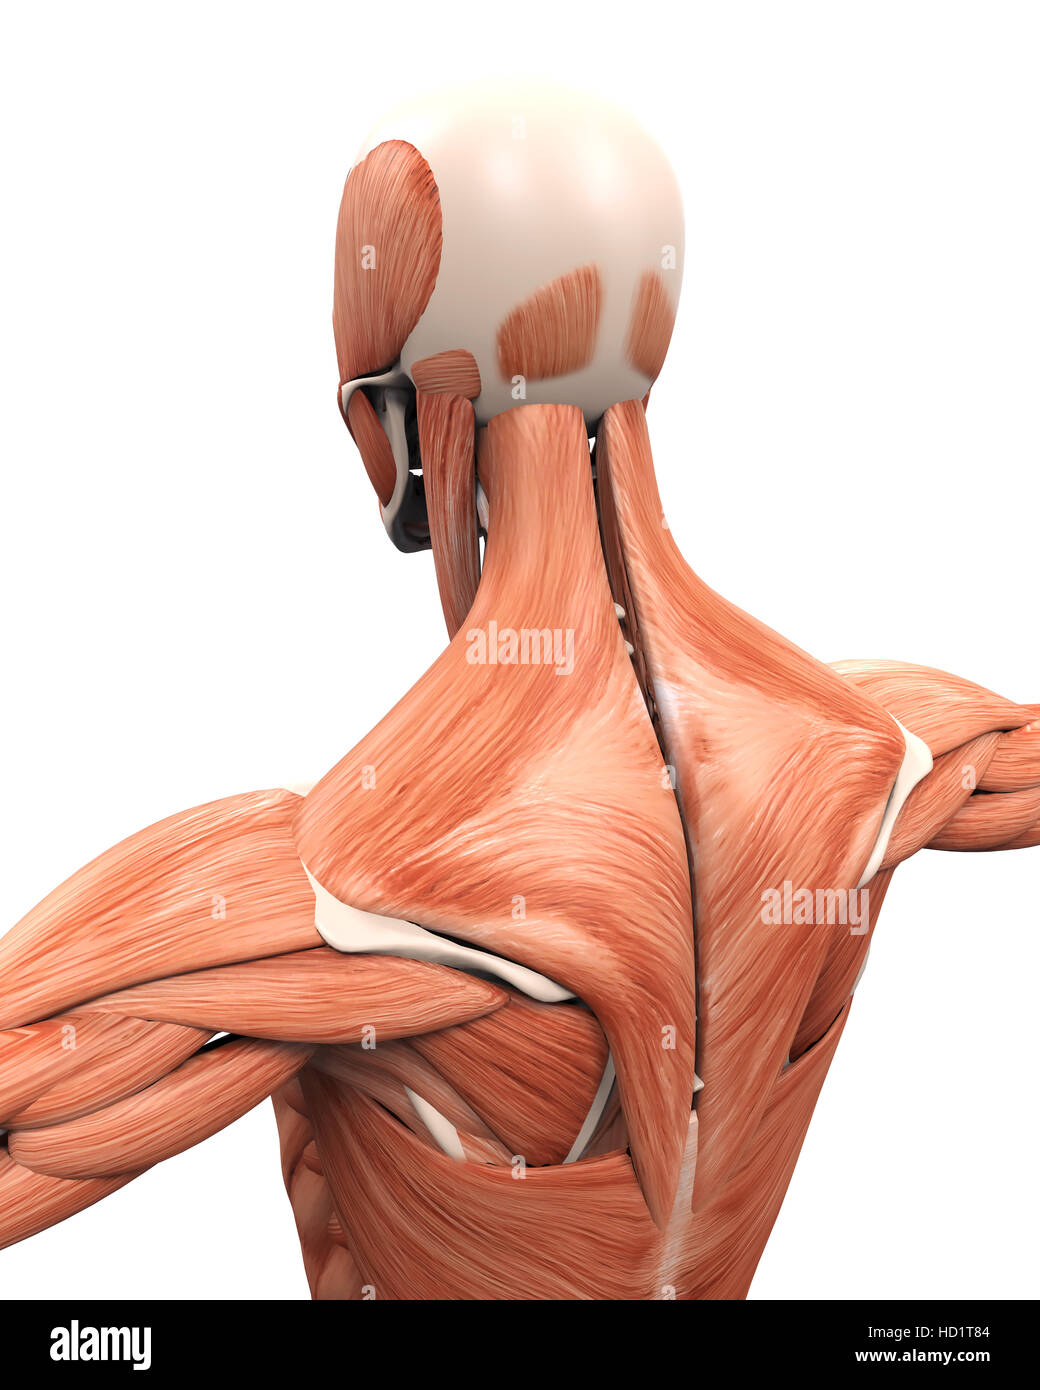 Muscular Anatomy of the Back Stock Photo